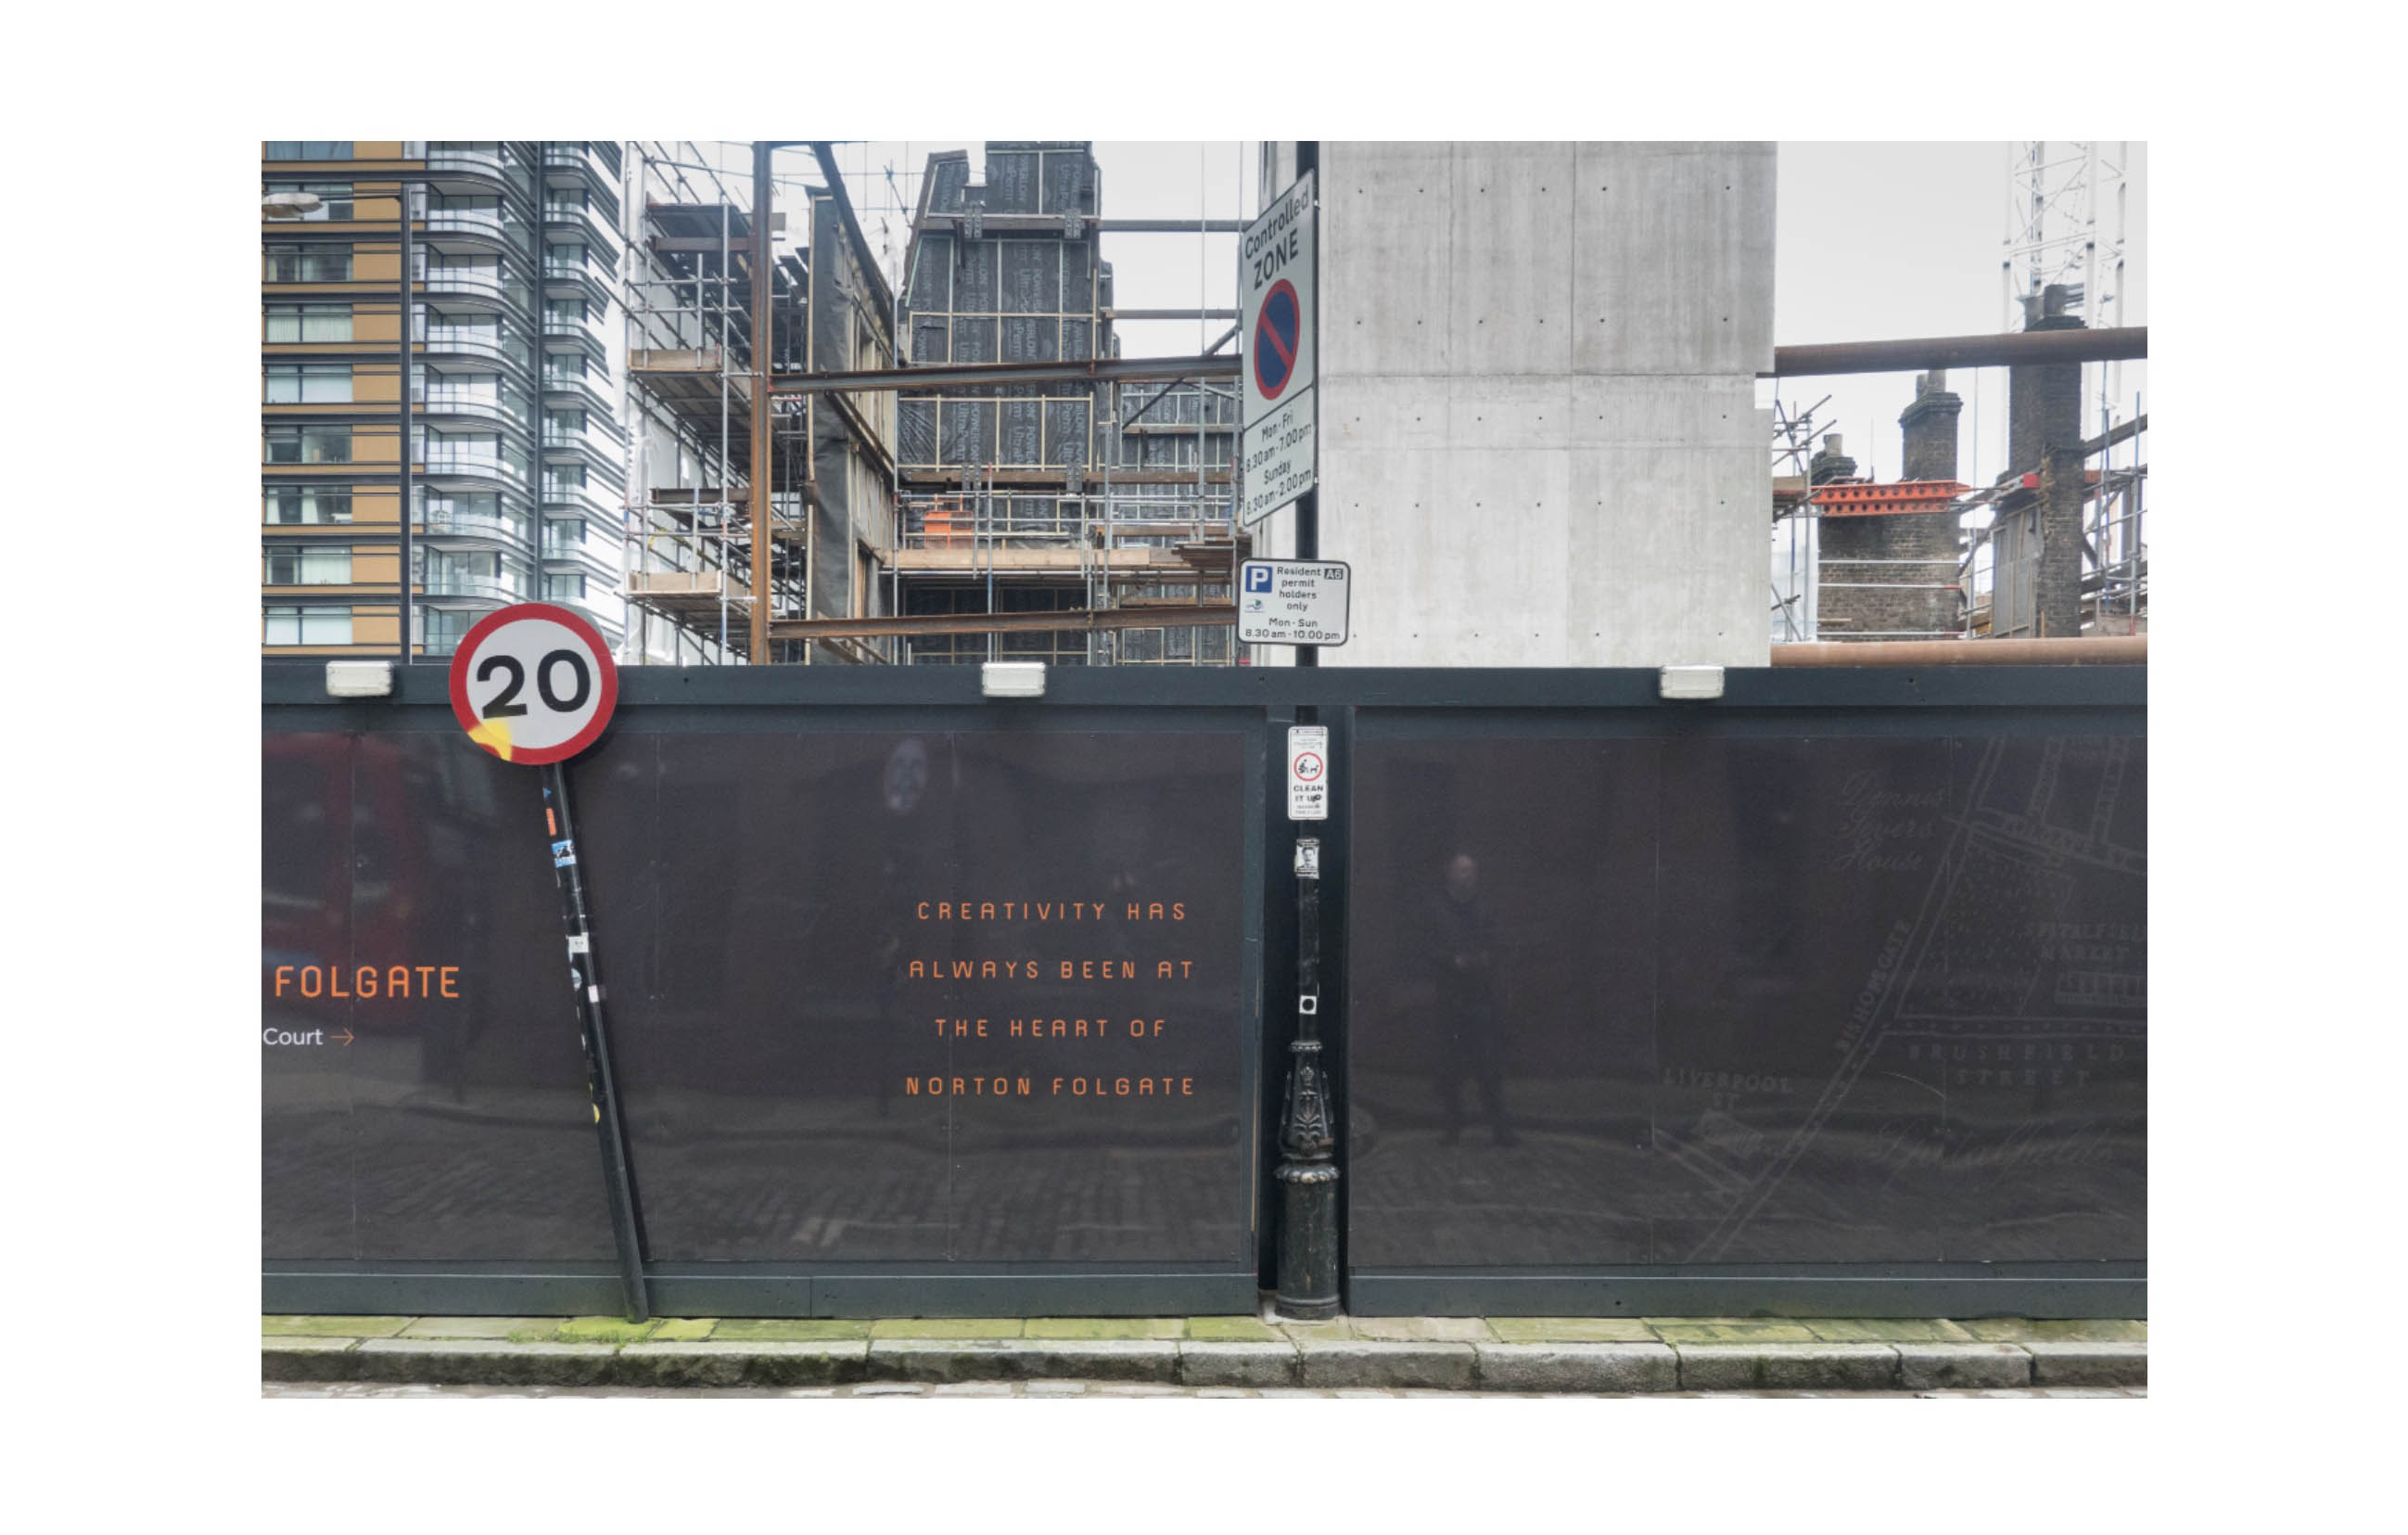 a black hoarding which says Creativity has always been at the heart of Norton Folgate